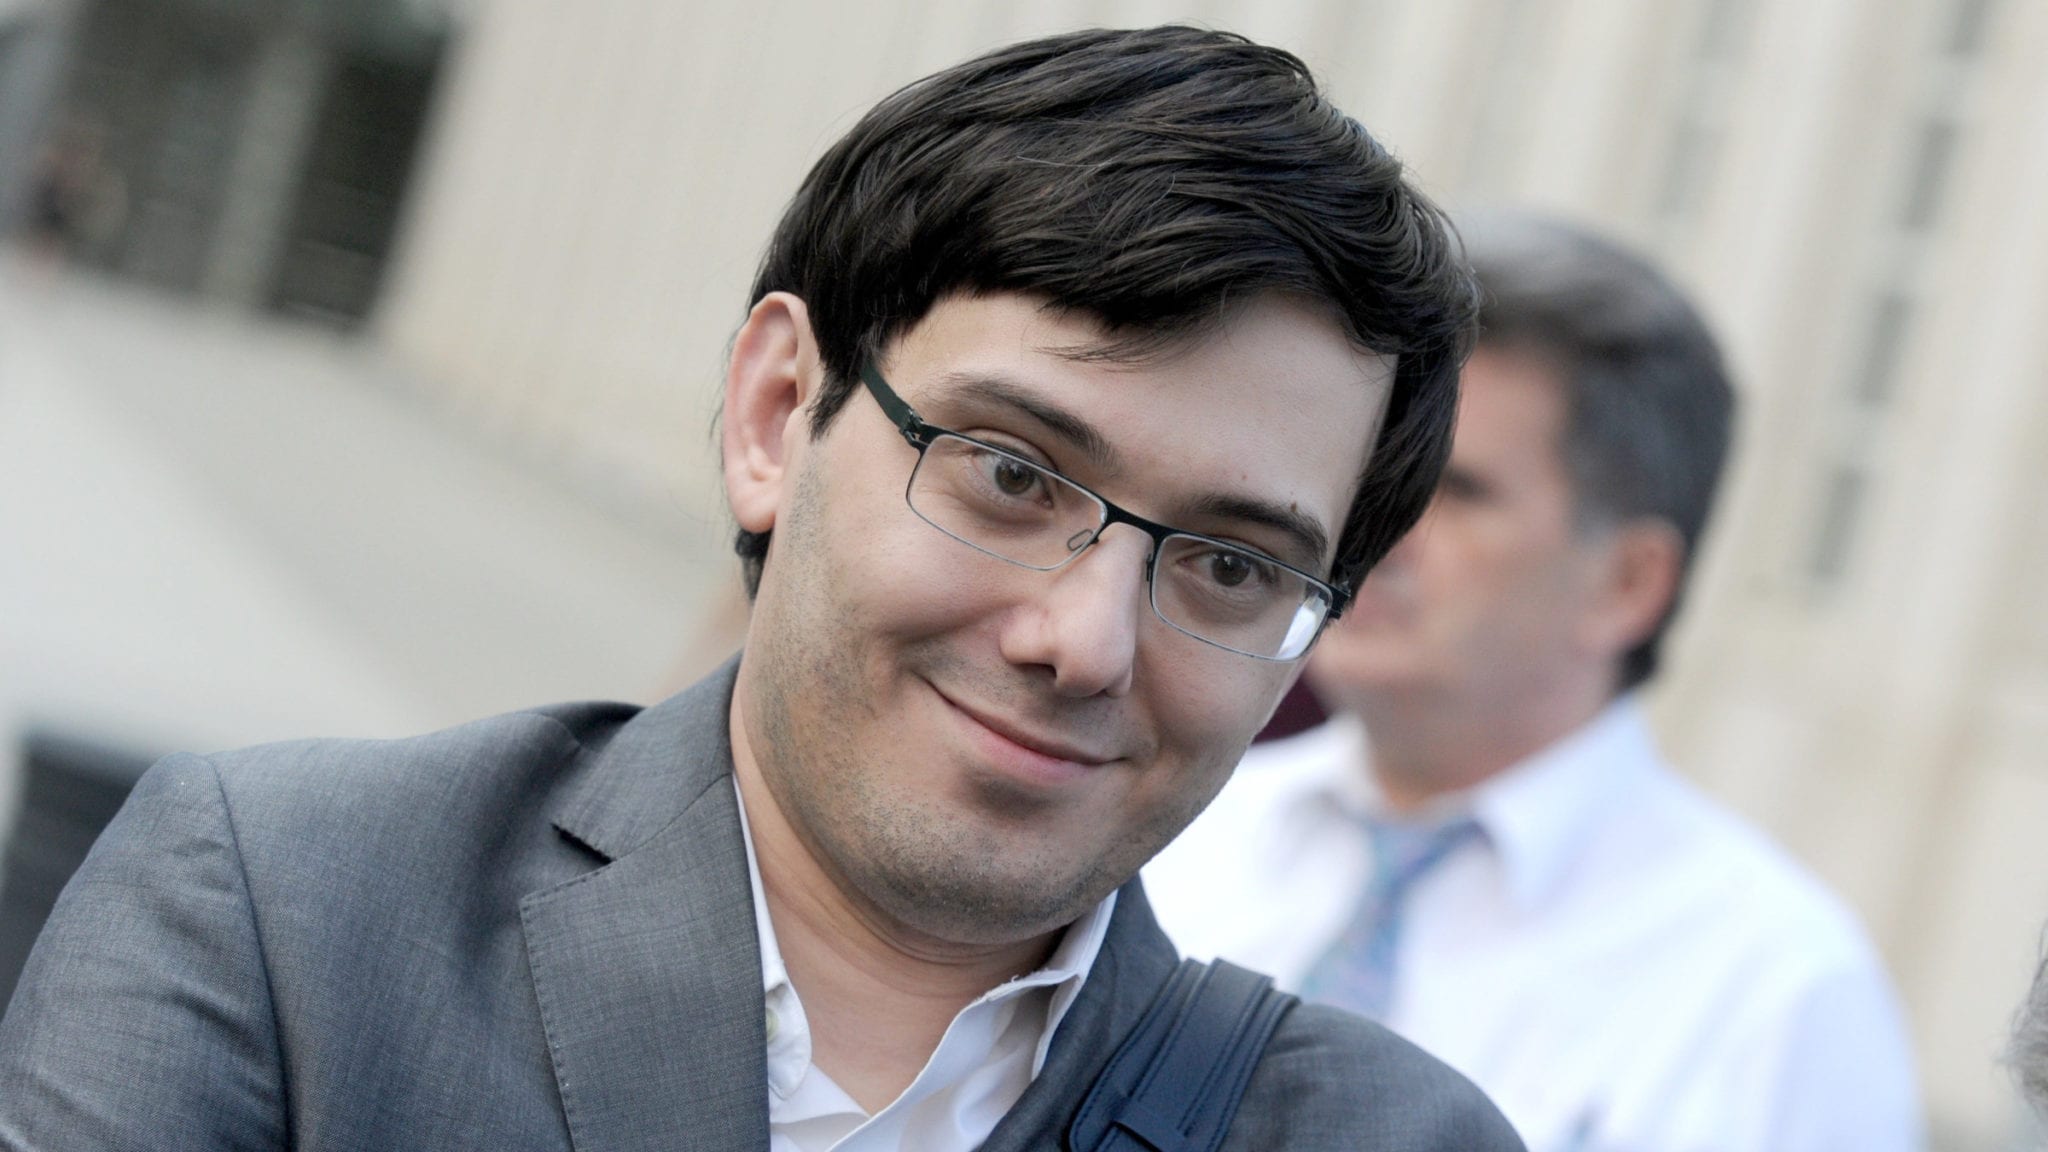 Infamous biotech exec Martin Shkreli gets out of prison, hits the street